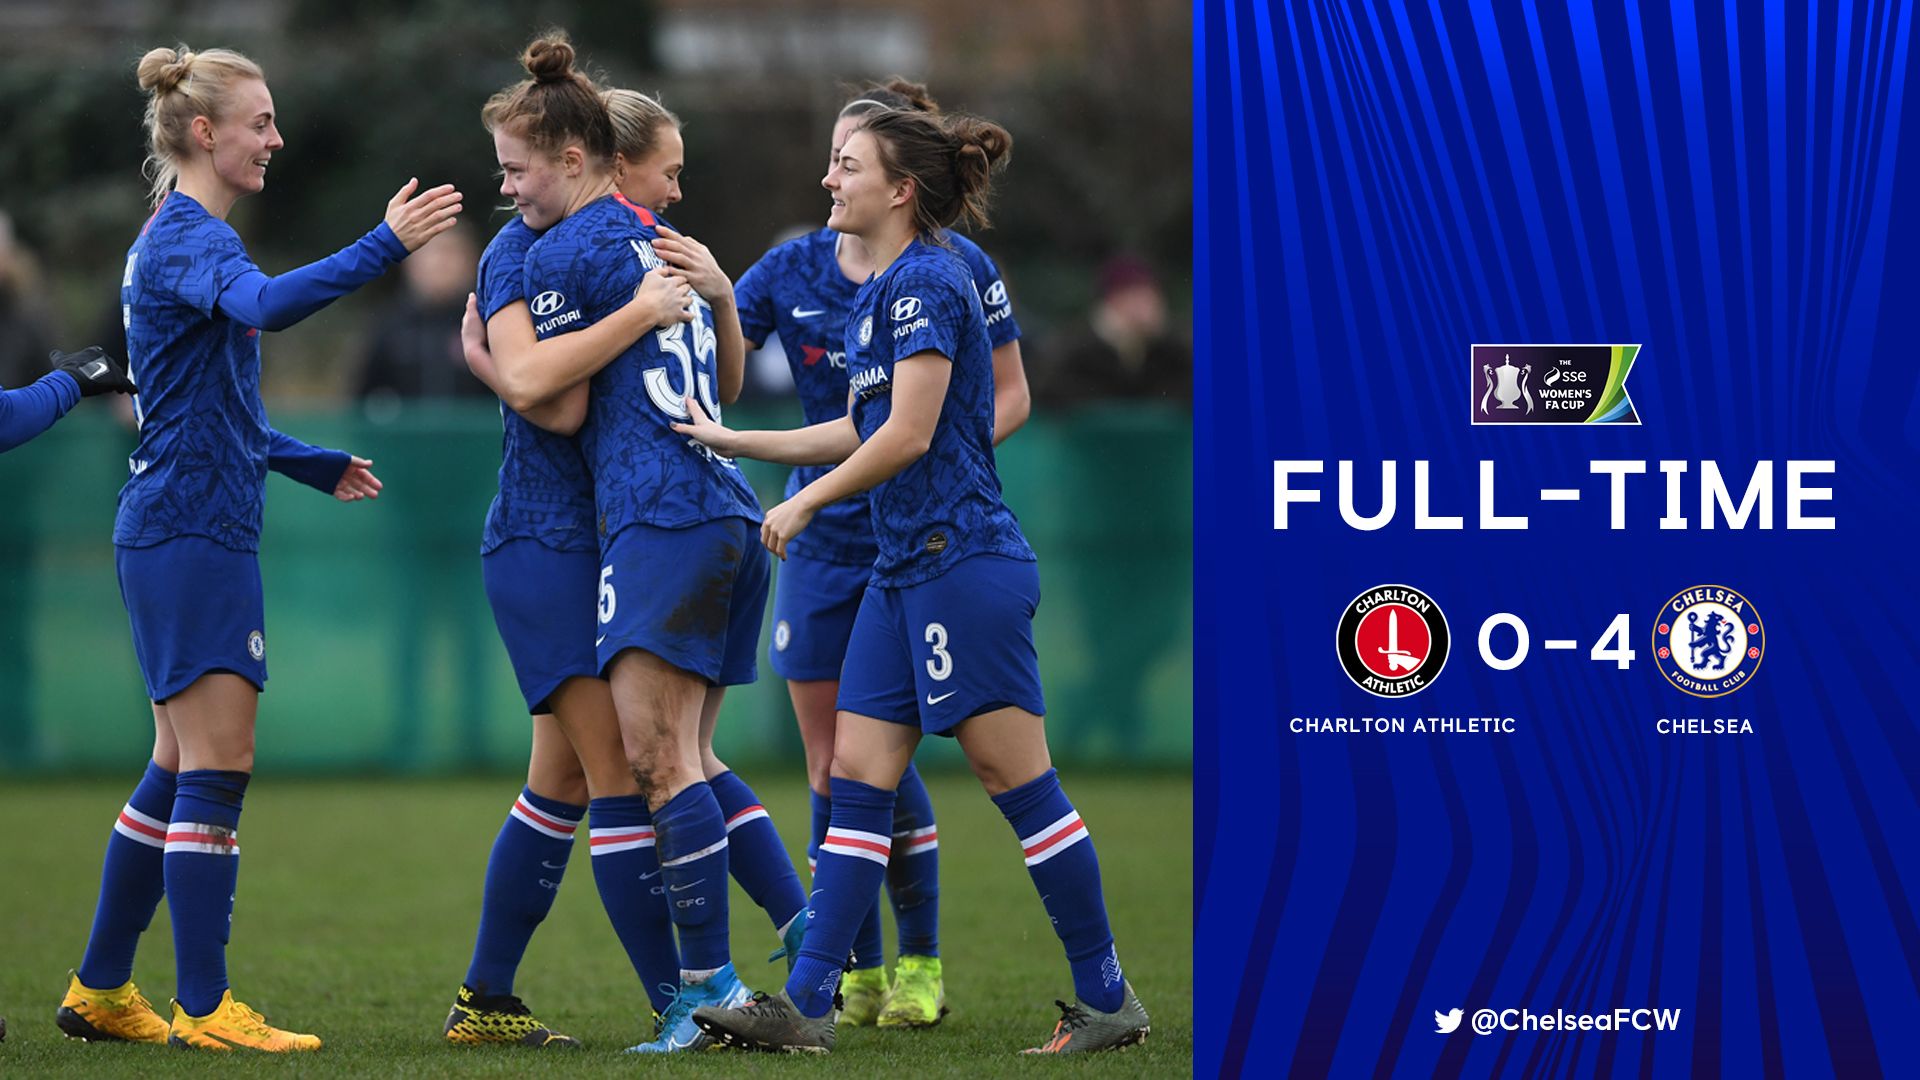 Chelsea FC Women are through to the next round of the women's FA